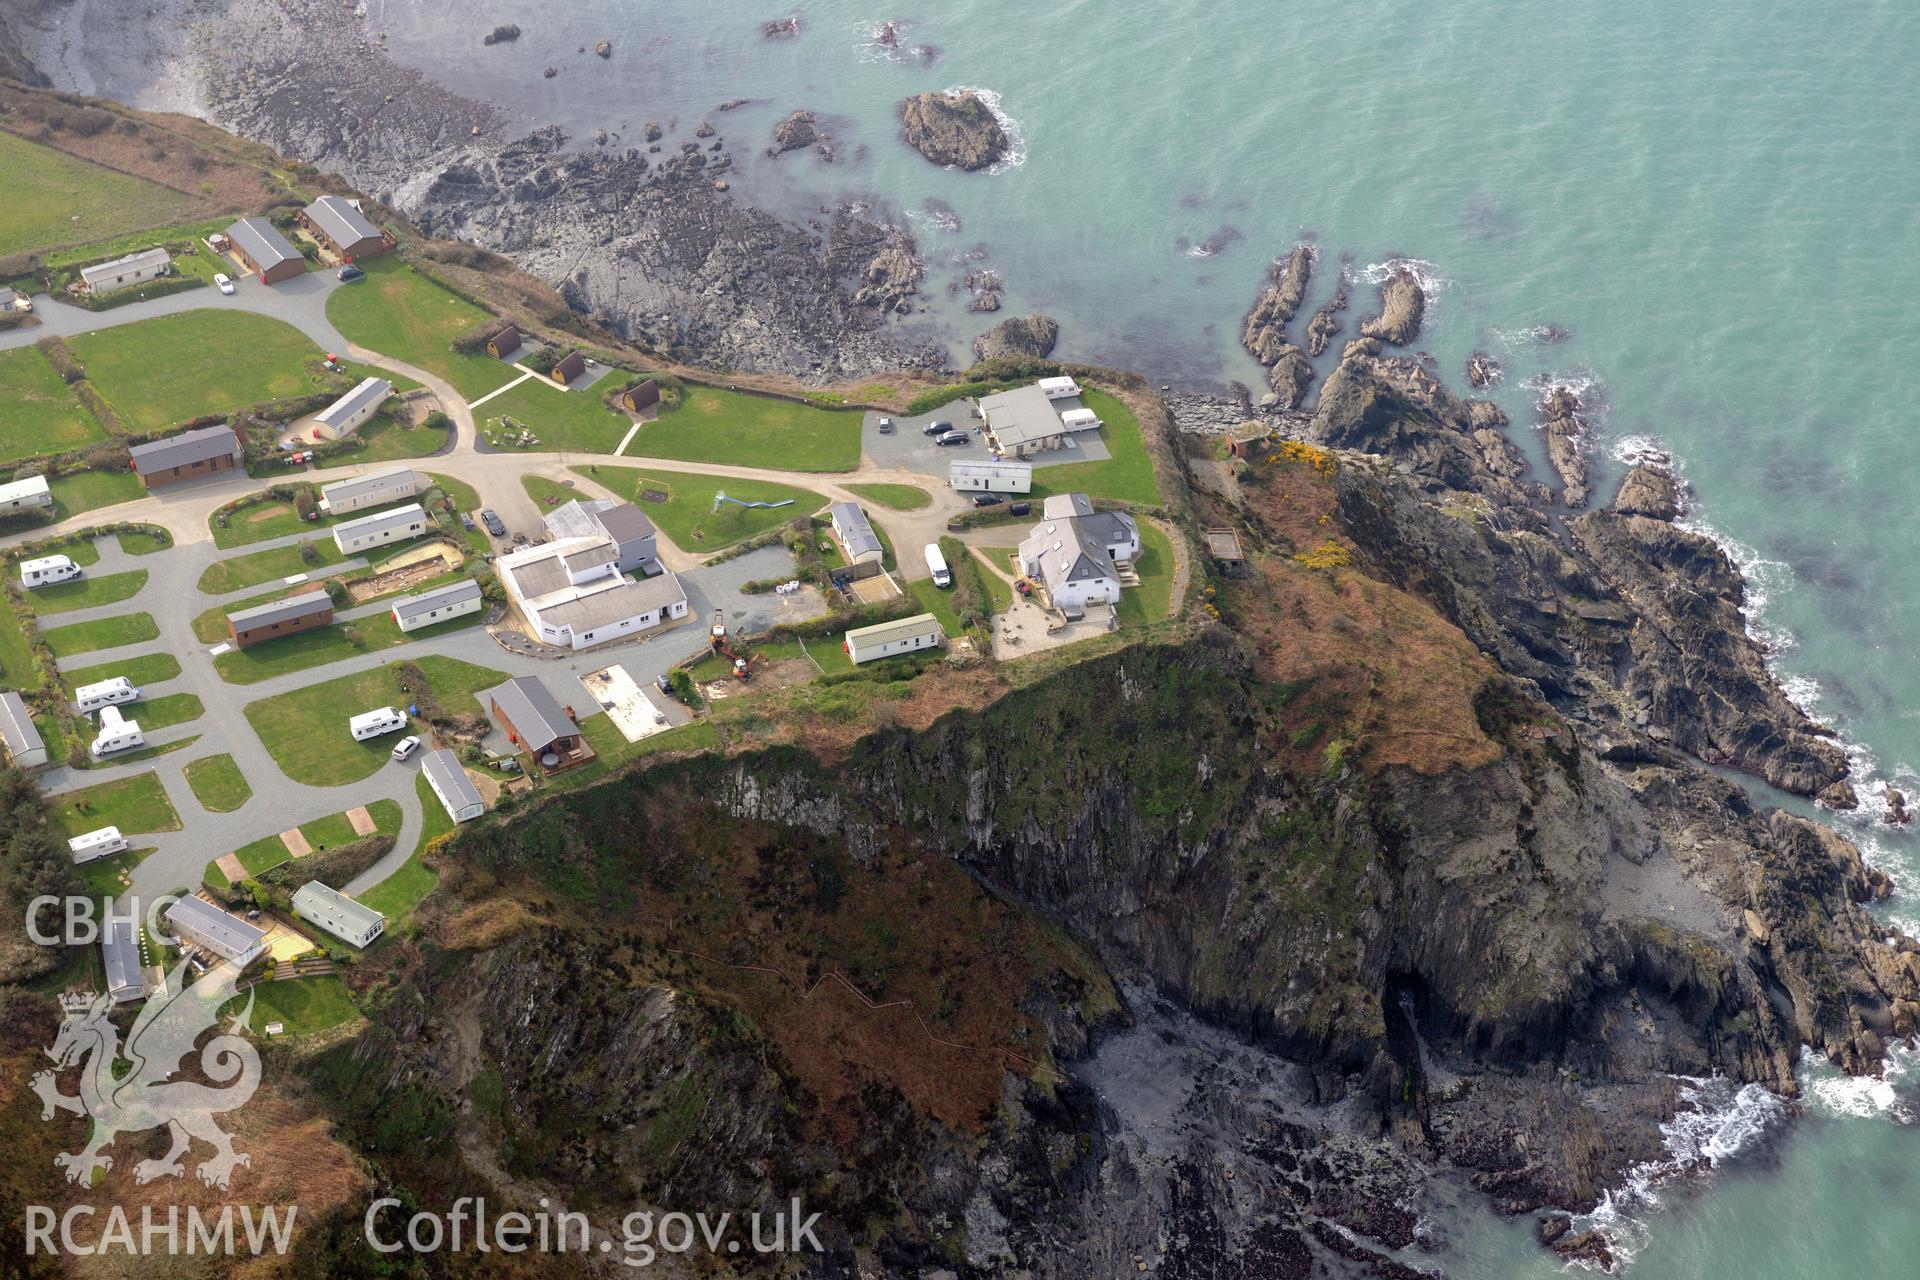 Royal Commission aerial photograph of Fishguard Battery taken on 27th March 2017. Baseline aerial reconnaissance survey for the CHERISH Project. ? Crown: CHERISH PROJECT 2017. Produced with EU funds through the Ireland Wales Co-operation Programme 2014-2020. All material made freely available through the Open Government Licence.